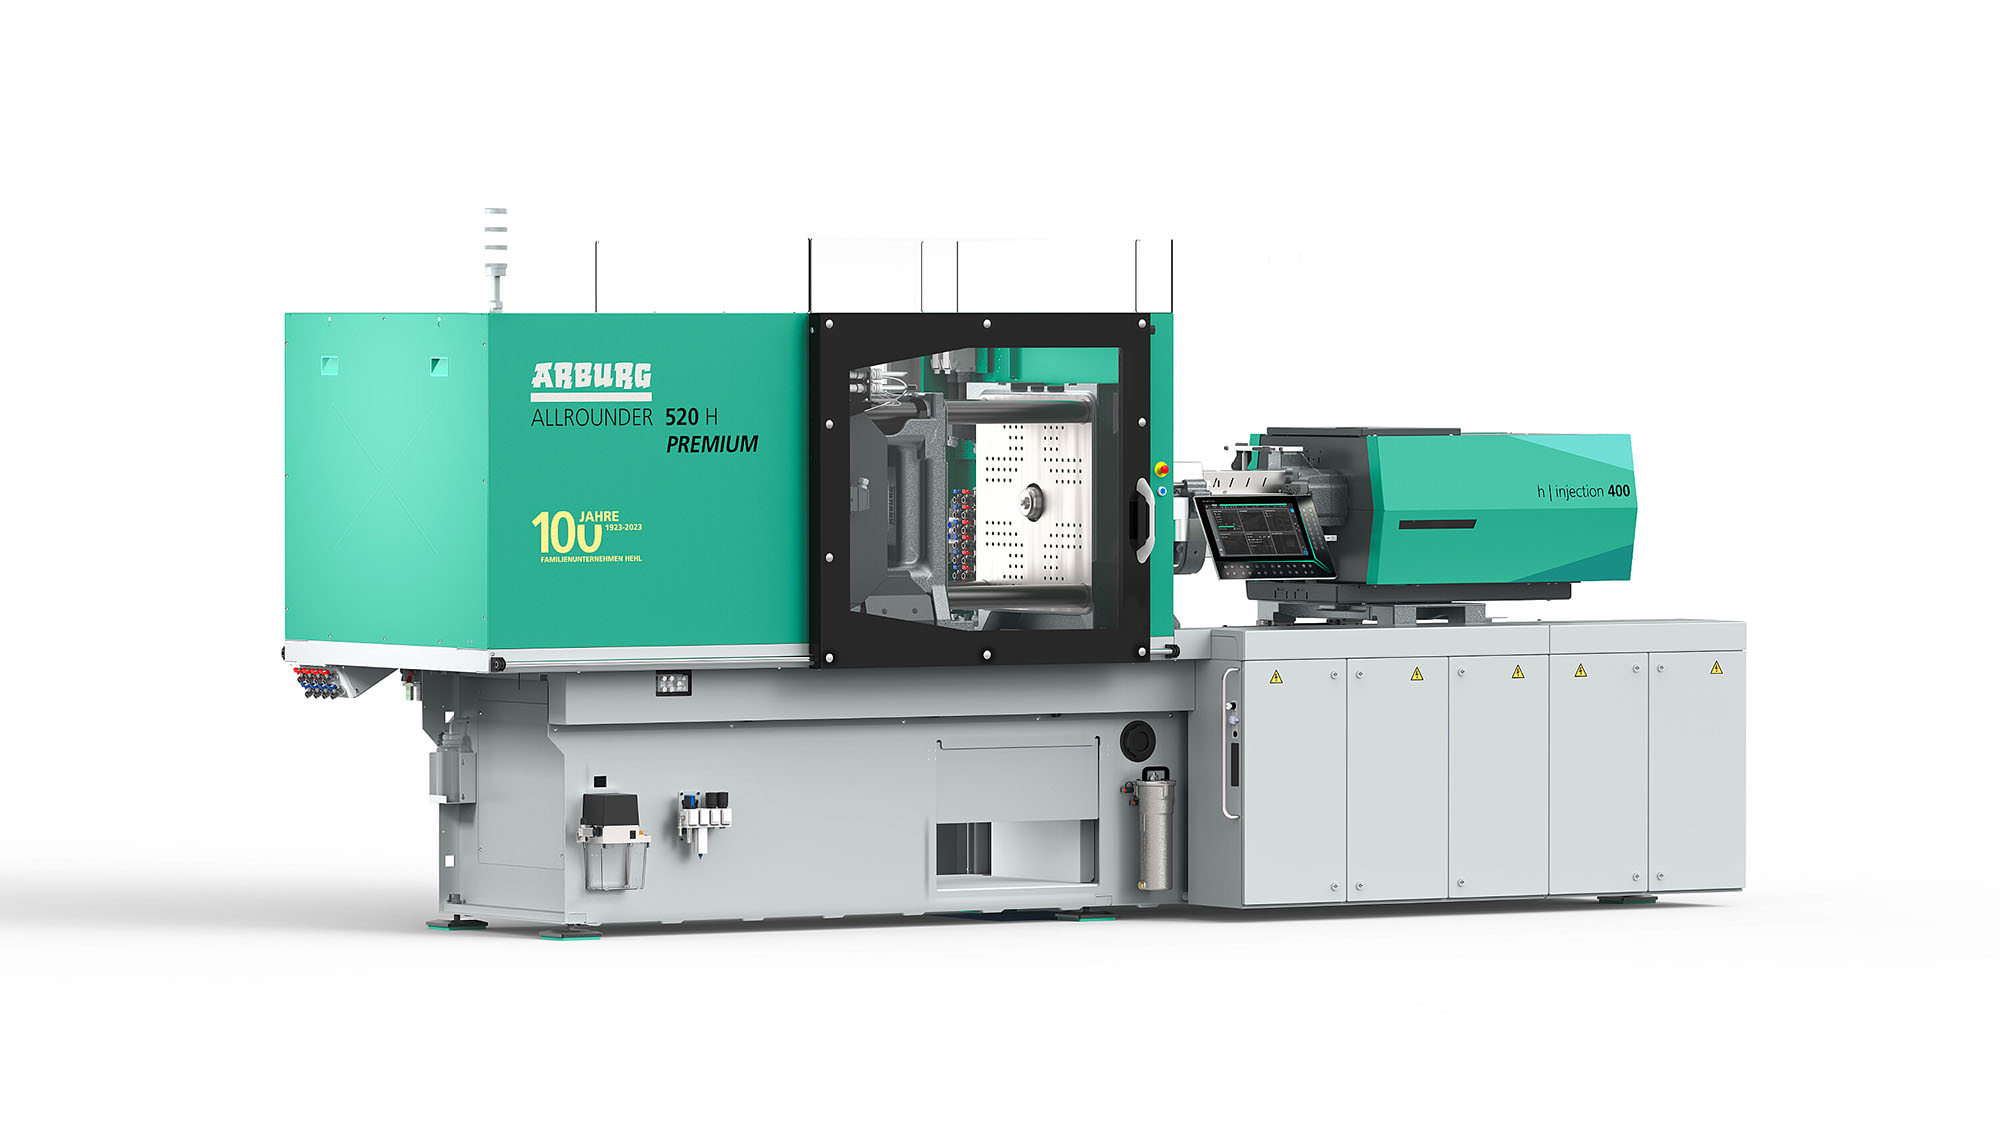 Arburg is rolling out its new 150-ton Allrounder 520 H hybrid press at Fakuma.